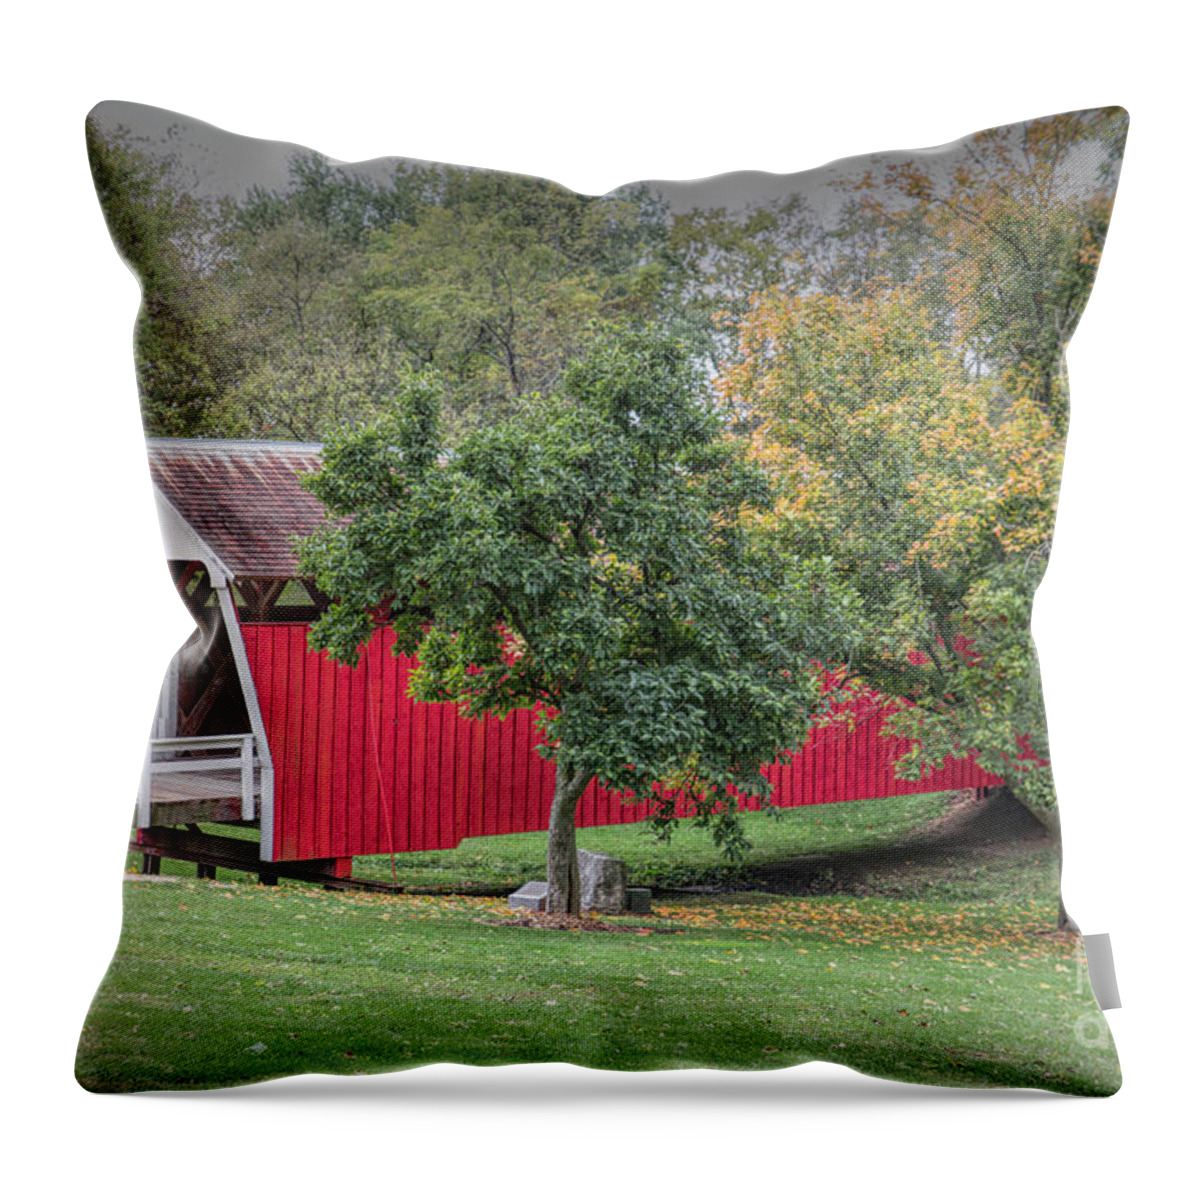 Cutler-donahoe Covered Bridge Throw Pillow featuring the photograph Cutler-Donahoe Covered Bridge by Lynn Sprowl